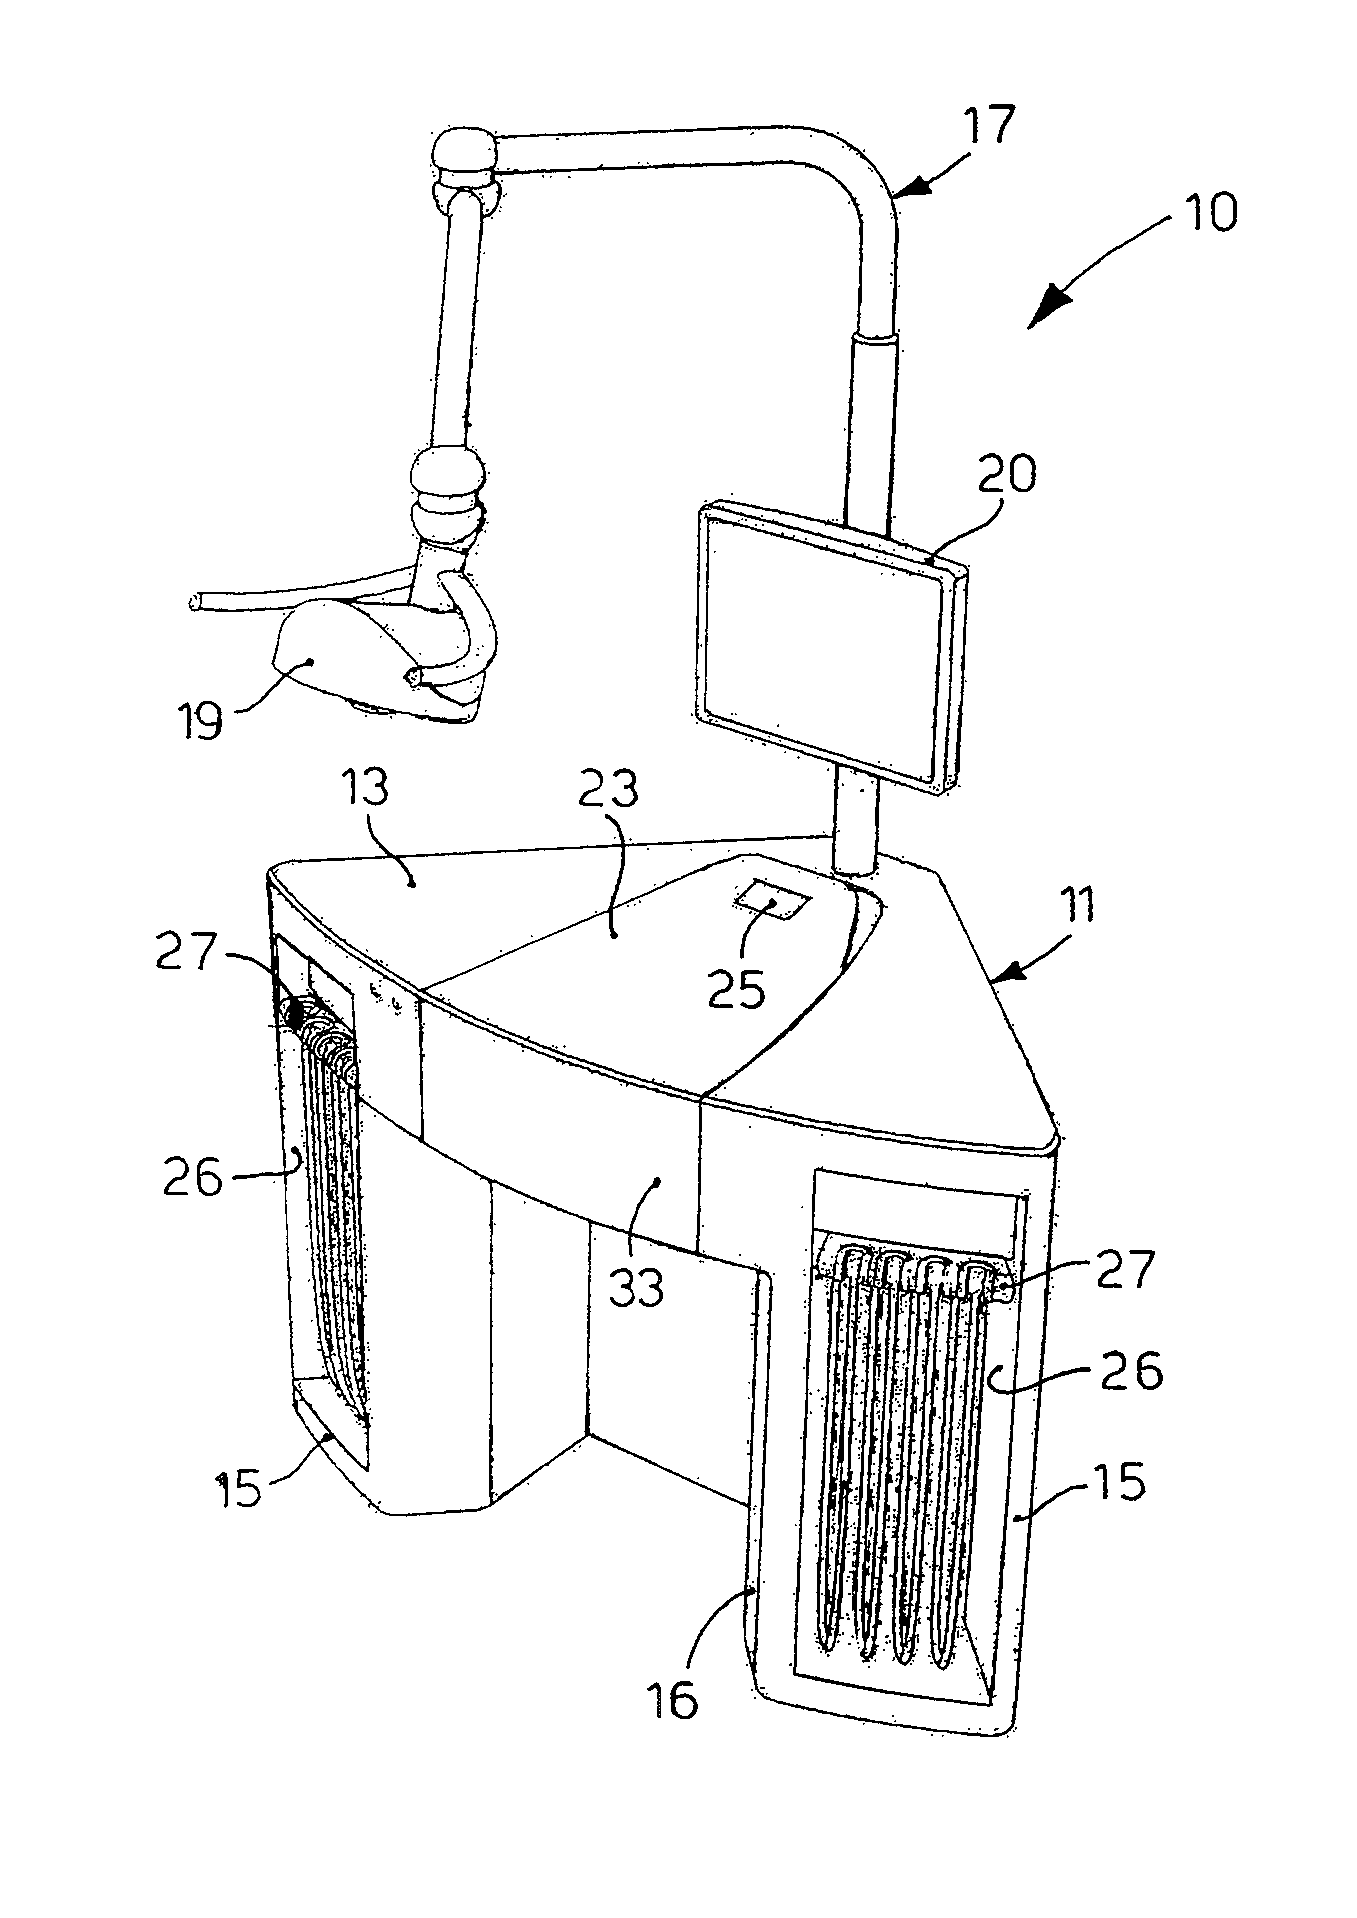 Apparatus for didactic dentistry operations